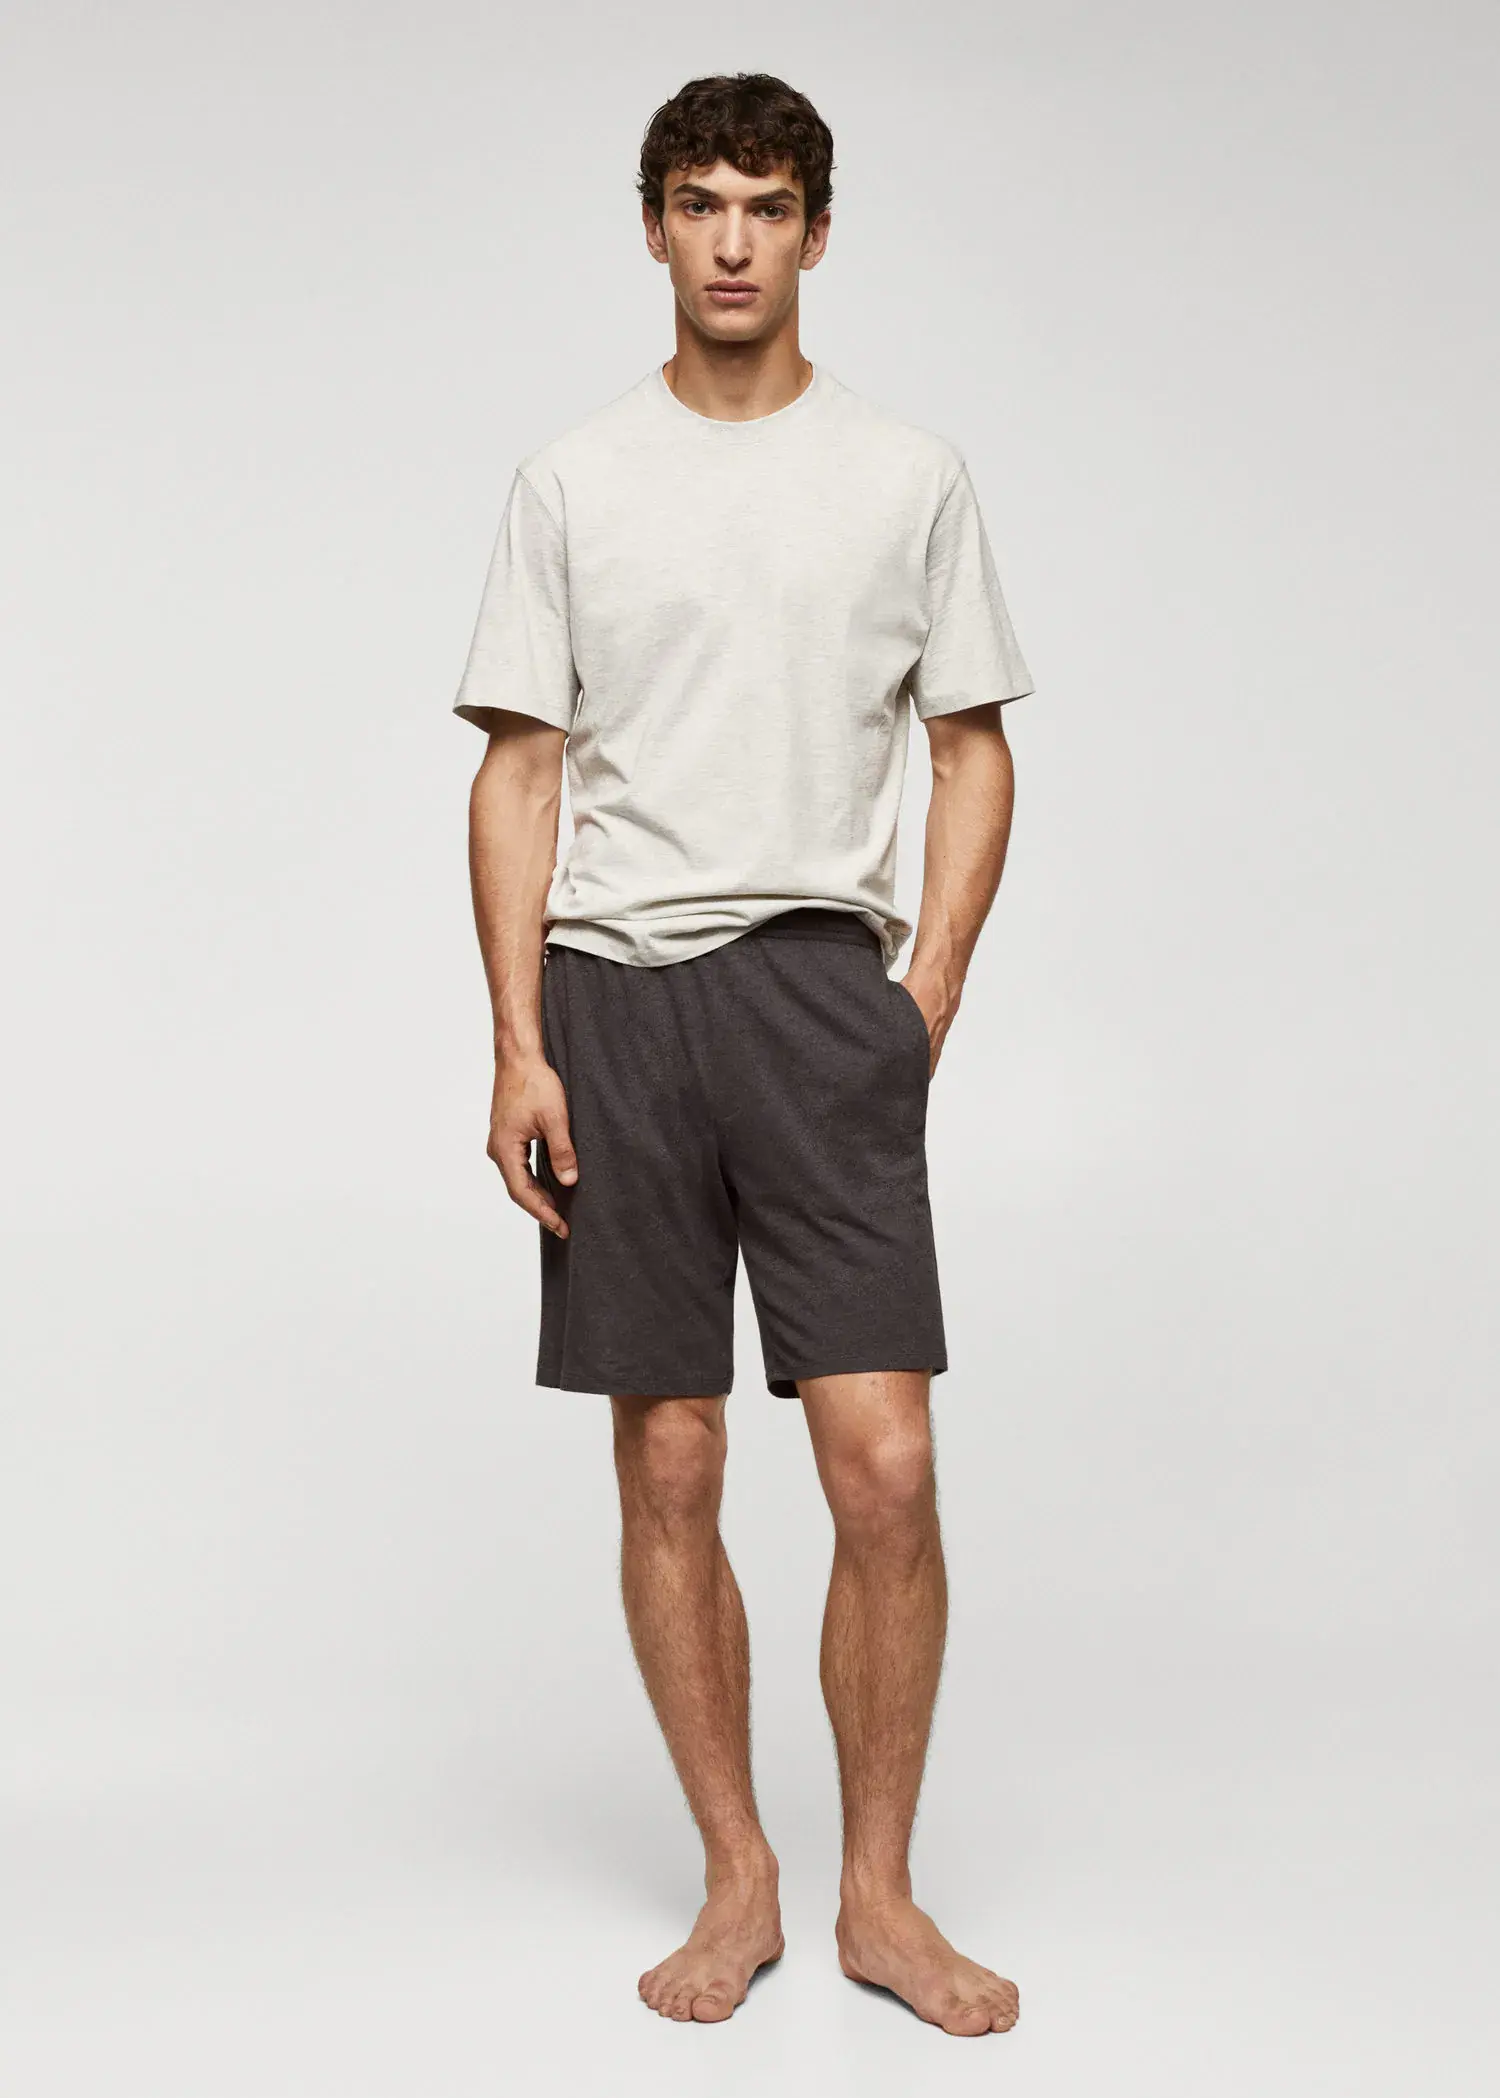 Mango Cotton pyjama shorts pack. a young man in a white t-shirt and black shorts. 